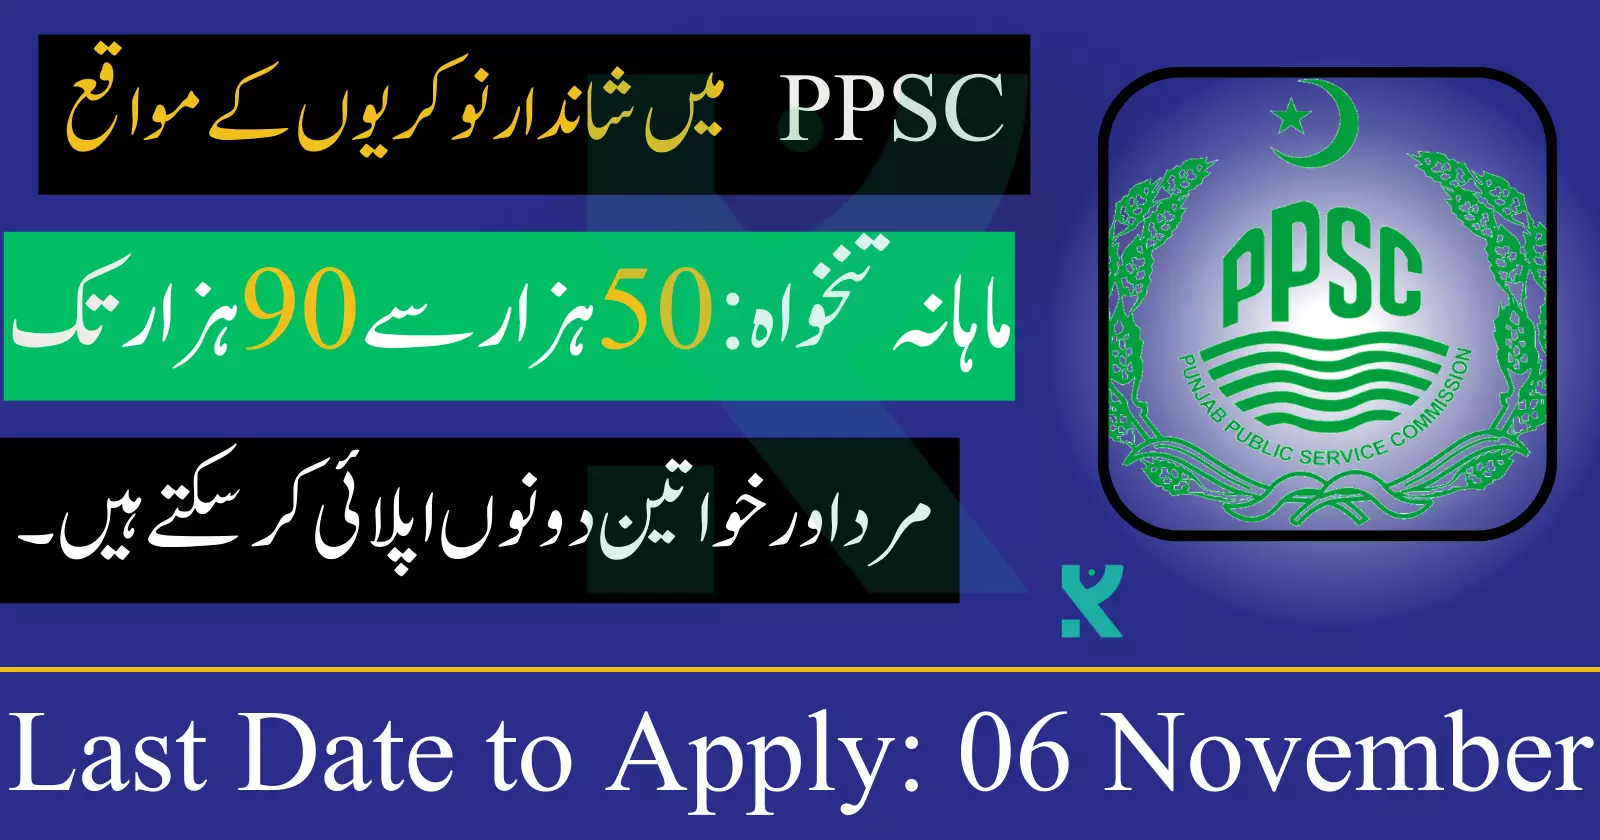 PPSC Jobs 2023 Apply Online Today for Punjab Public Service Commission!